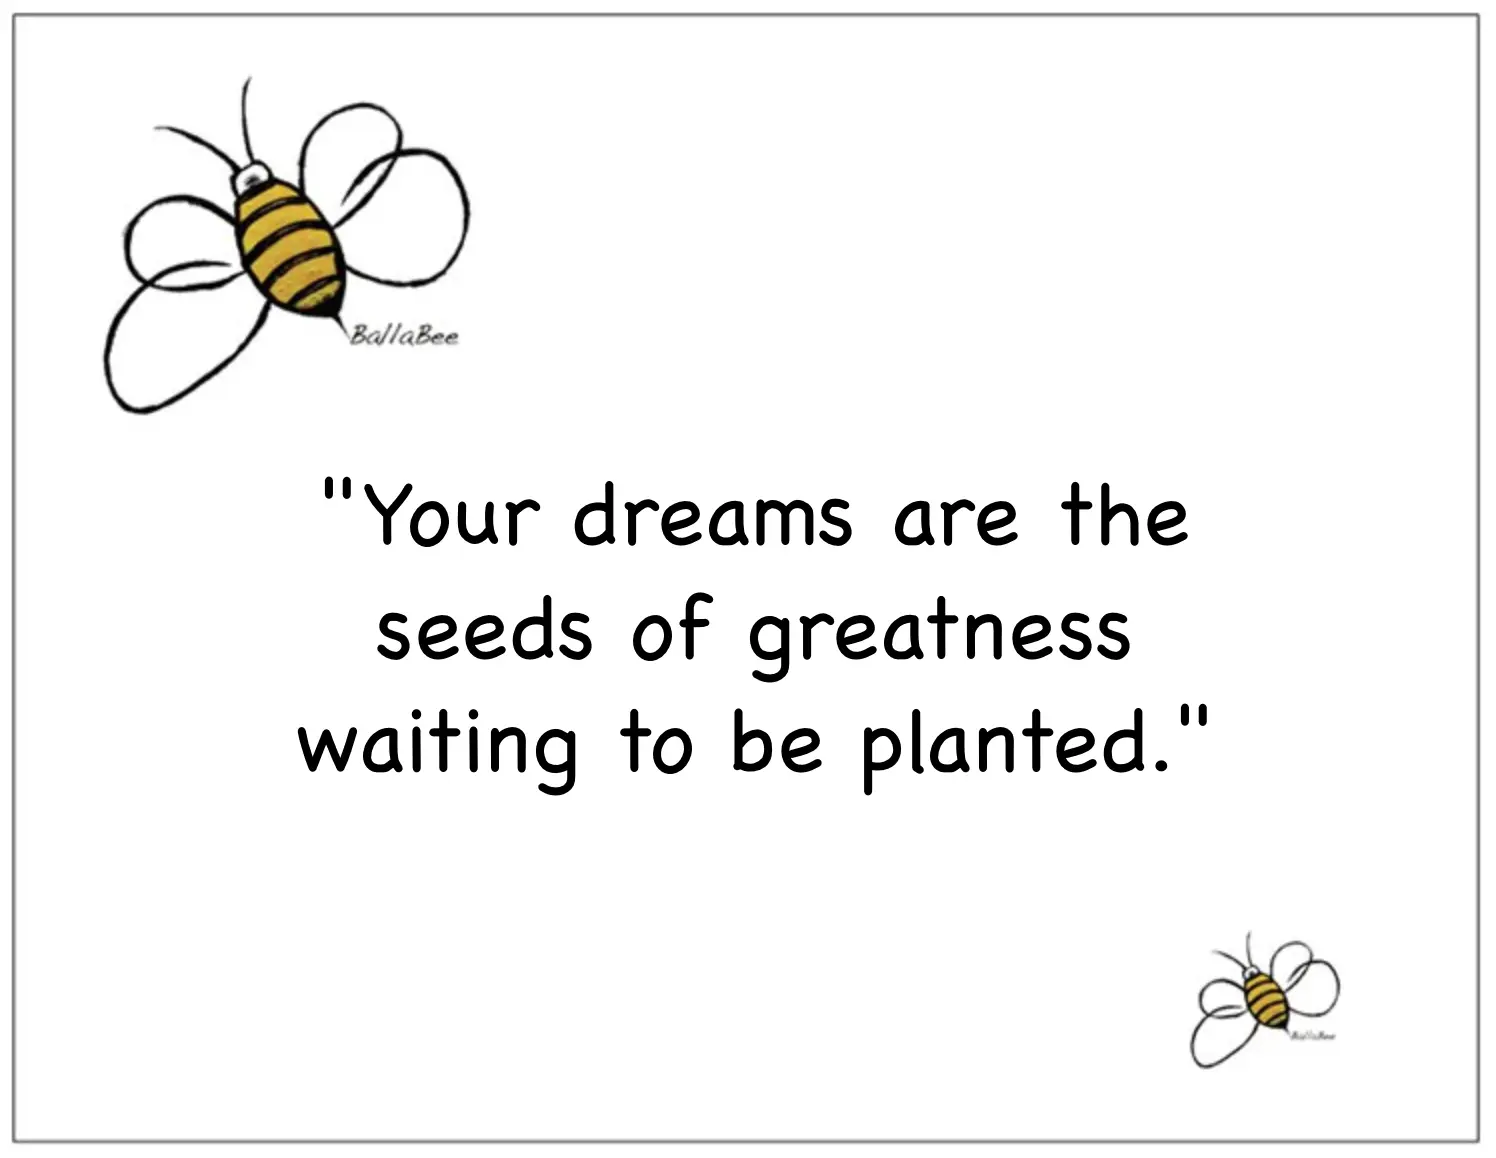 Your dreams are the seeds of greatness waiting to be planted